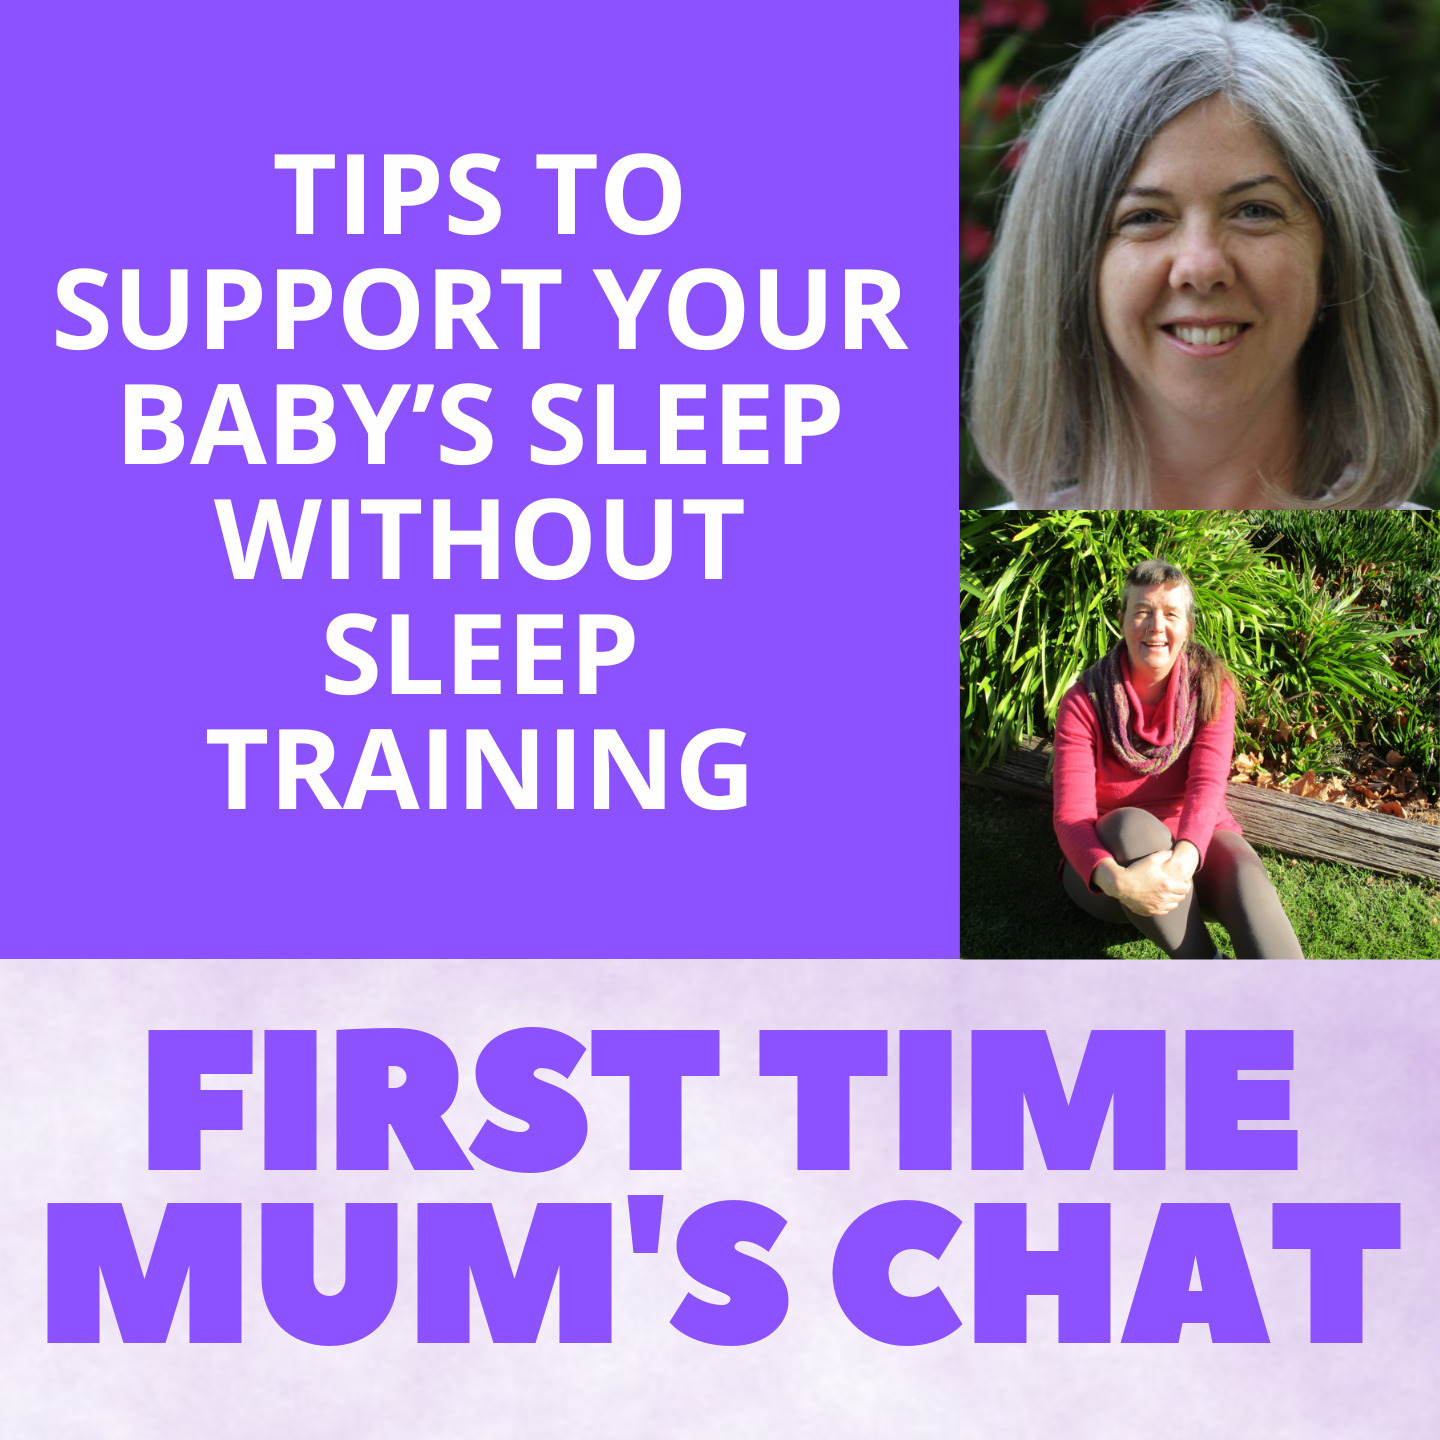 Tips to Support Your Baby’s Sleep Without Sleep Training